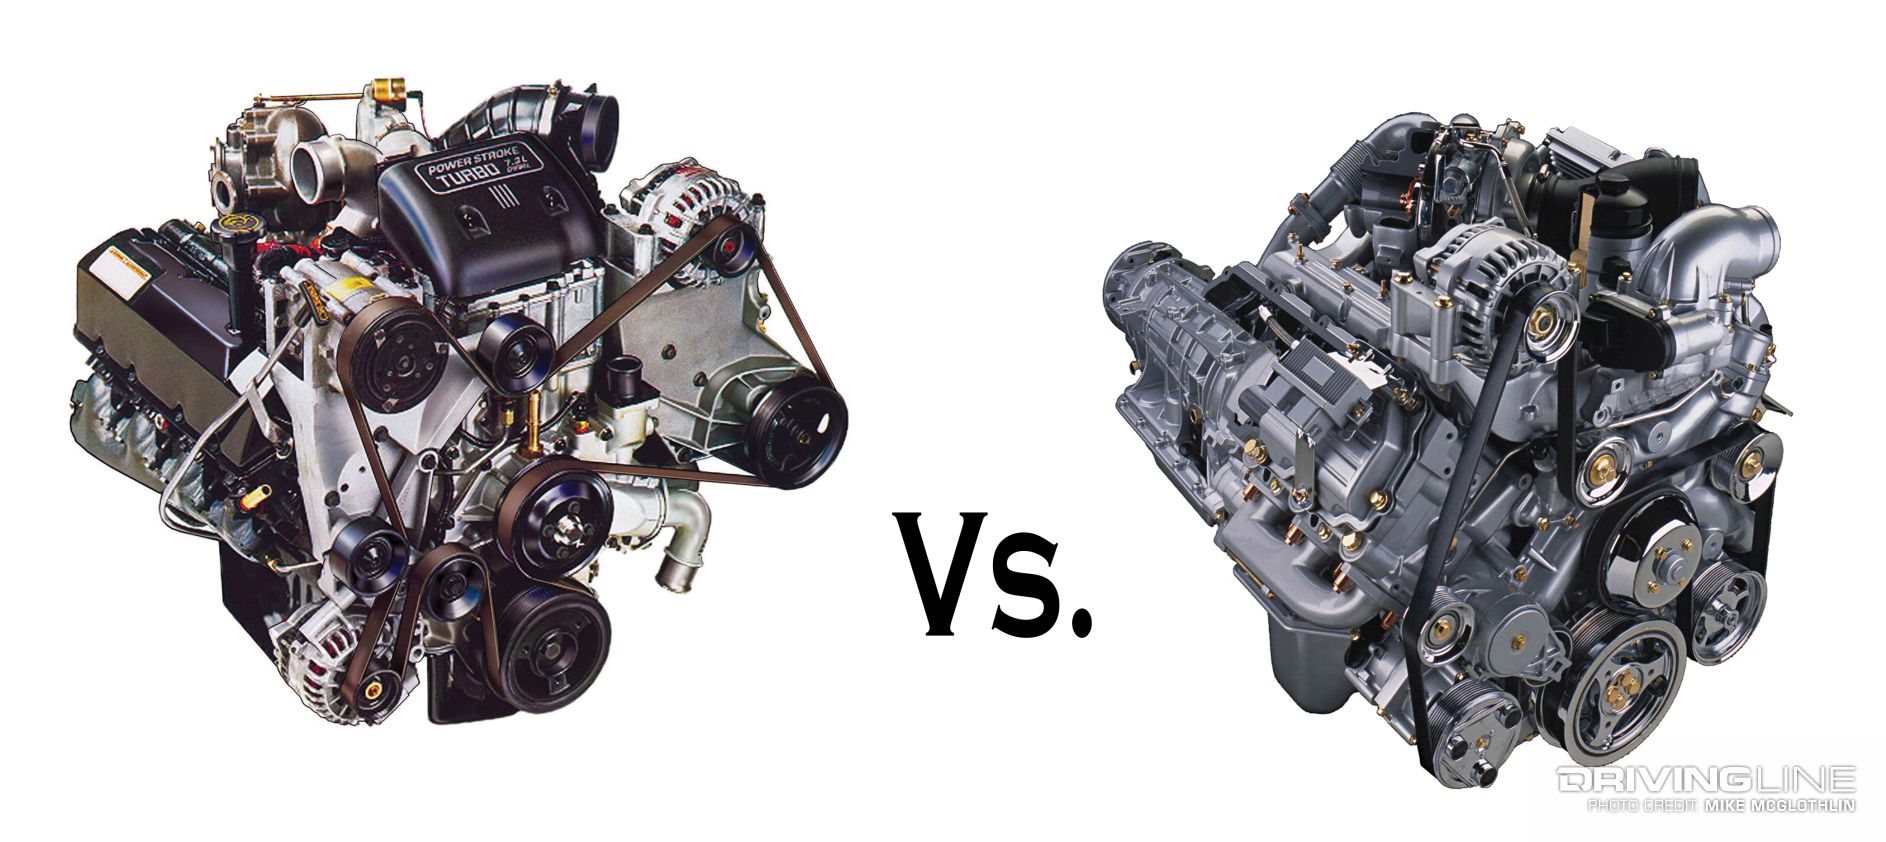 7.3L vs. 6.0L: Which Power Stroke Is Really Better? 